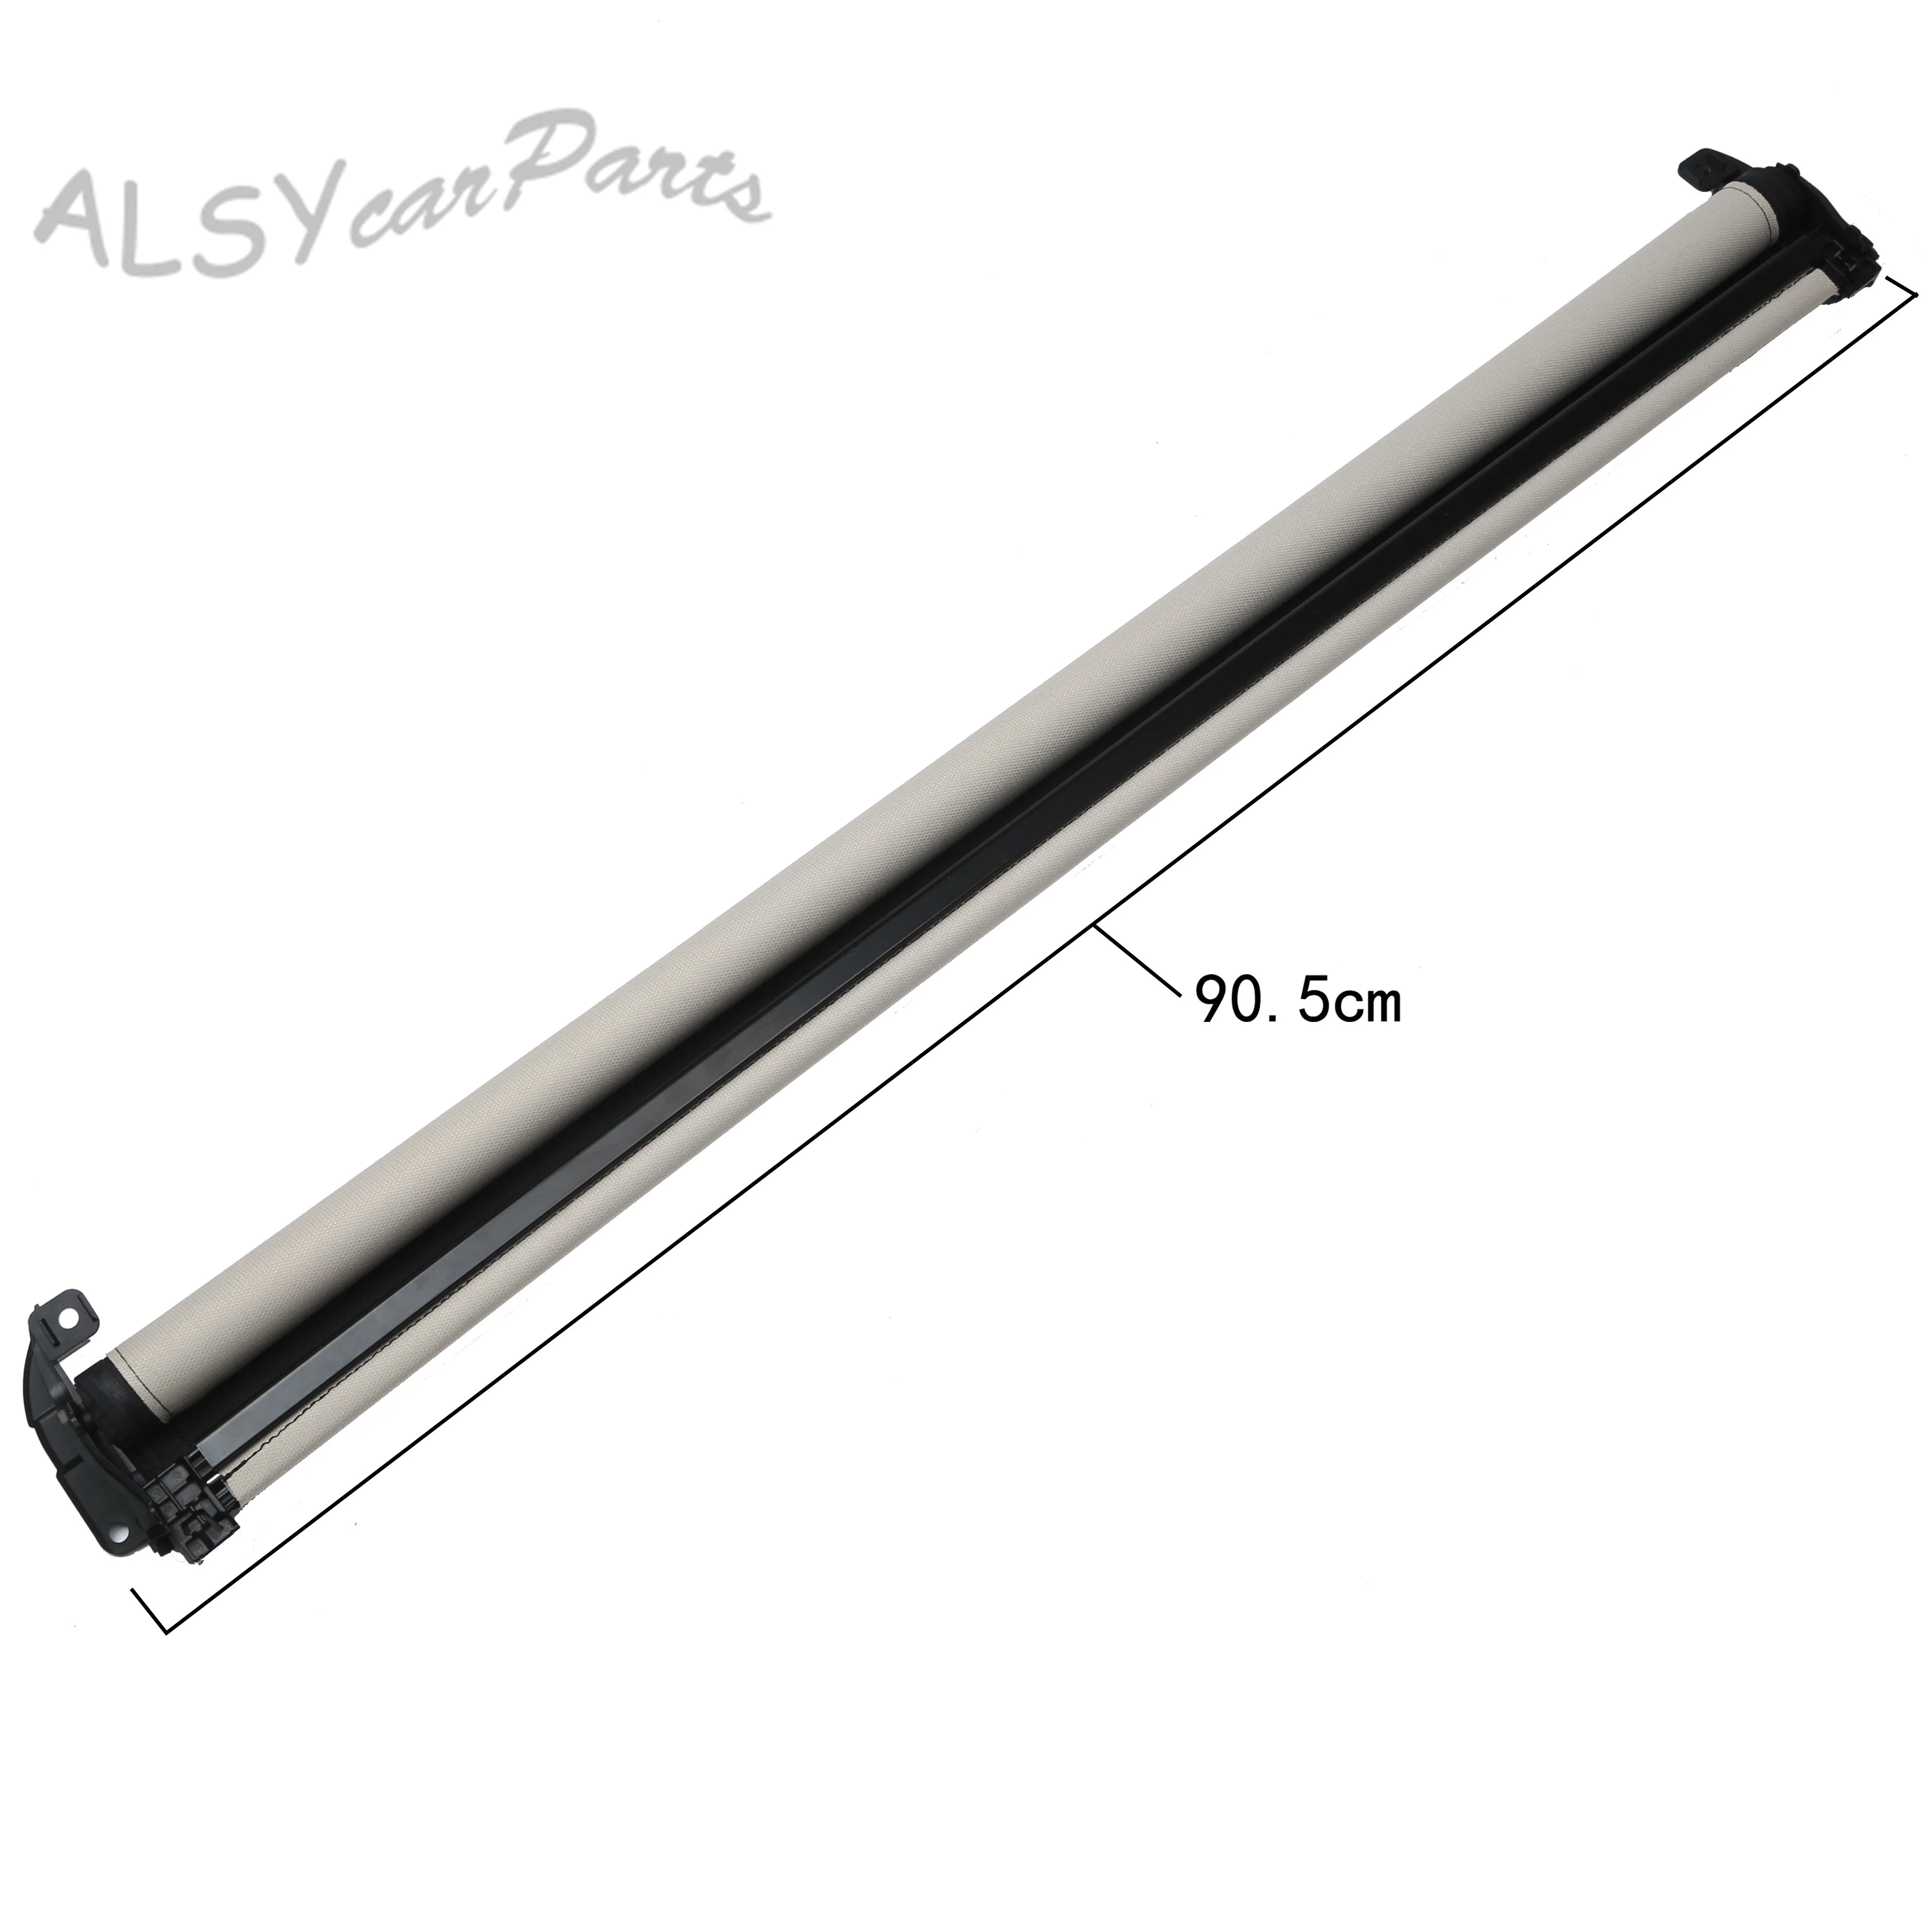 Rear Sunroof Roller Blind Assembly Gray 54107409199 7409198 For BMW 7 Series G12 2016-2019 2.0T 6.6L 740Le M760Li xDrive images - 6